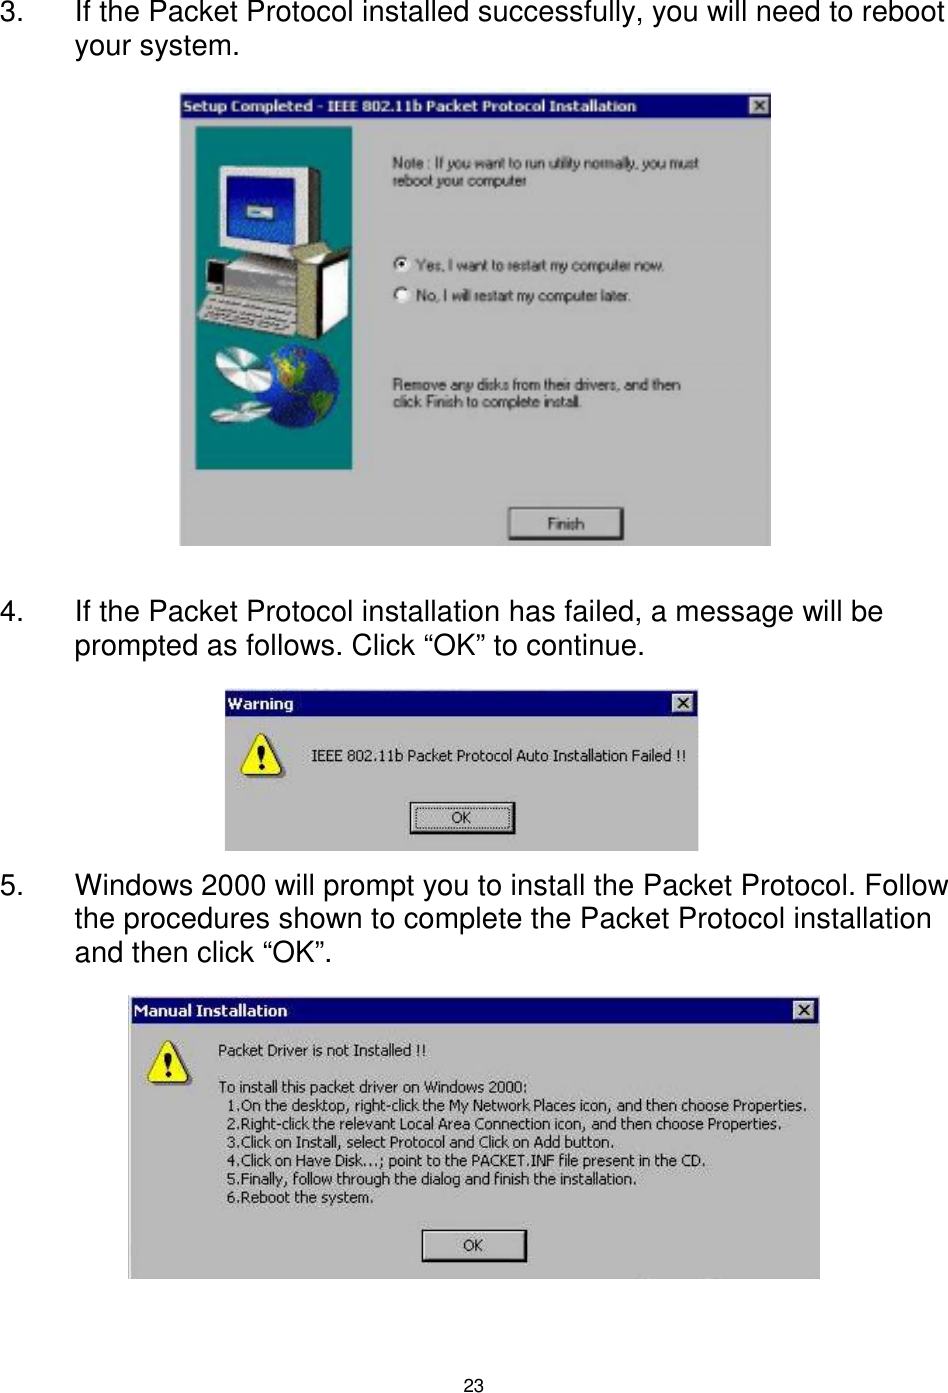  23   3.  If the Packet Protocol installed successfully, you will need to reboot your system.                4.  If the Packet Protocol installation has failed, a message will be prompted as follows. Click “OK” to continue.      5.  Windows 2000 will prompt you to install the Packet Protocol. Follow the procedures shown to complete the Packet Protocol installation and then click “OK”.  